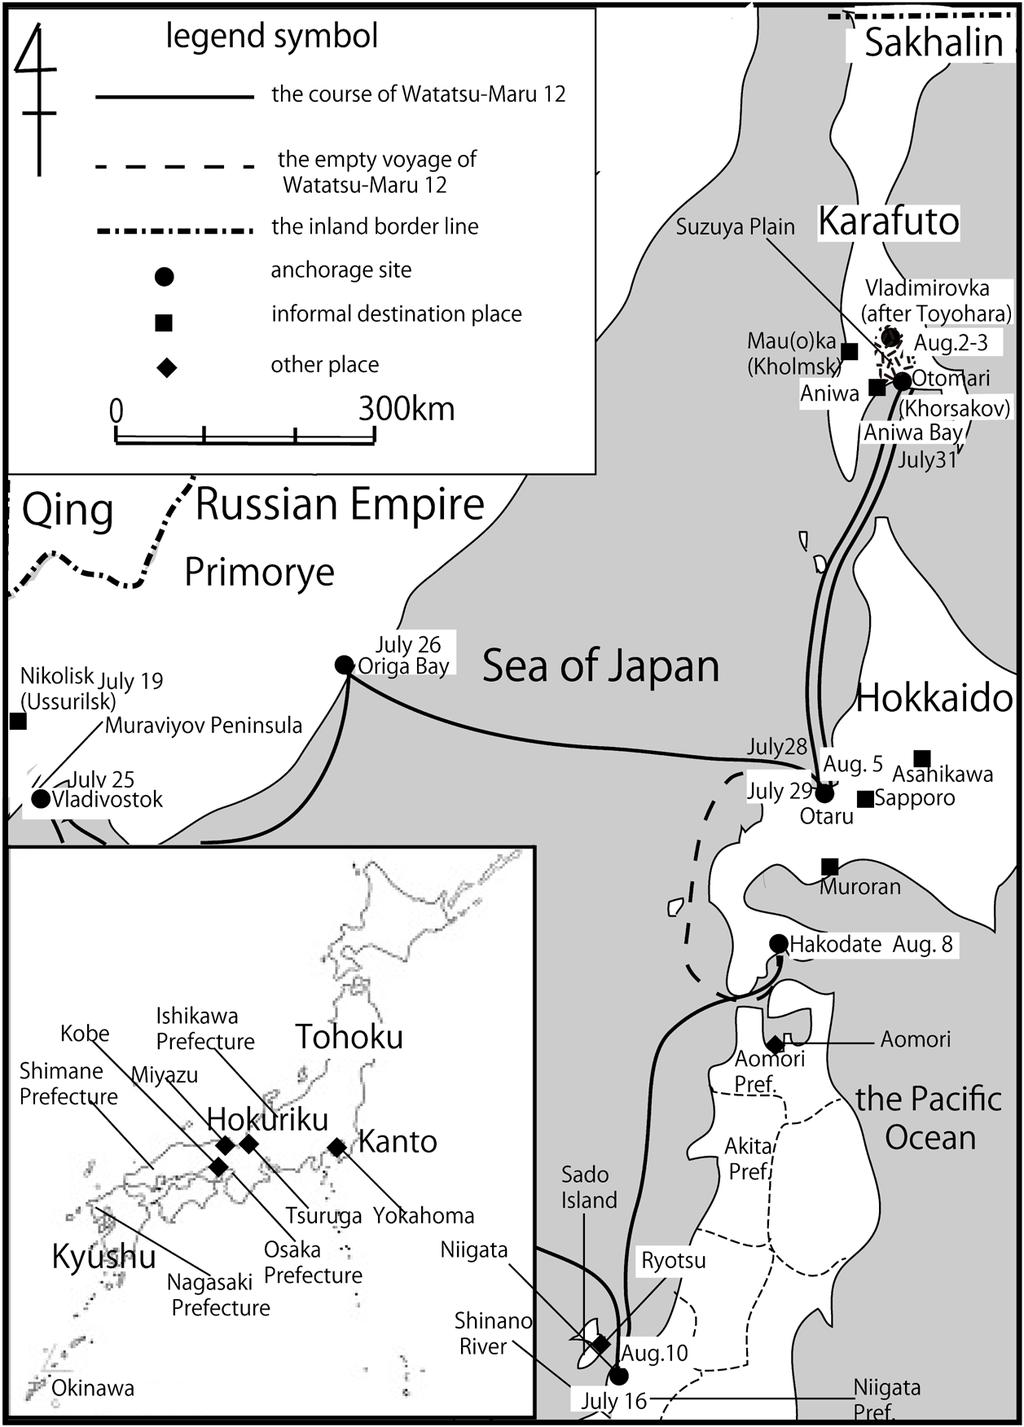 Karafuto in the Sea of Japan Rim Regions after the Russo-Japanese War Figure 2. A vocational inspection route in Niigata Prefecture in 1907. Hokkaido before the Russo-Japanese War.